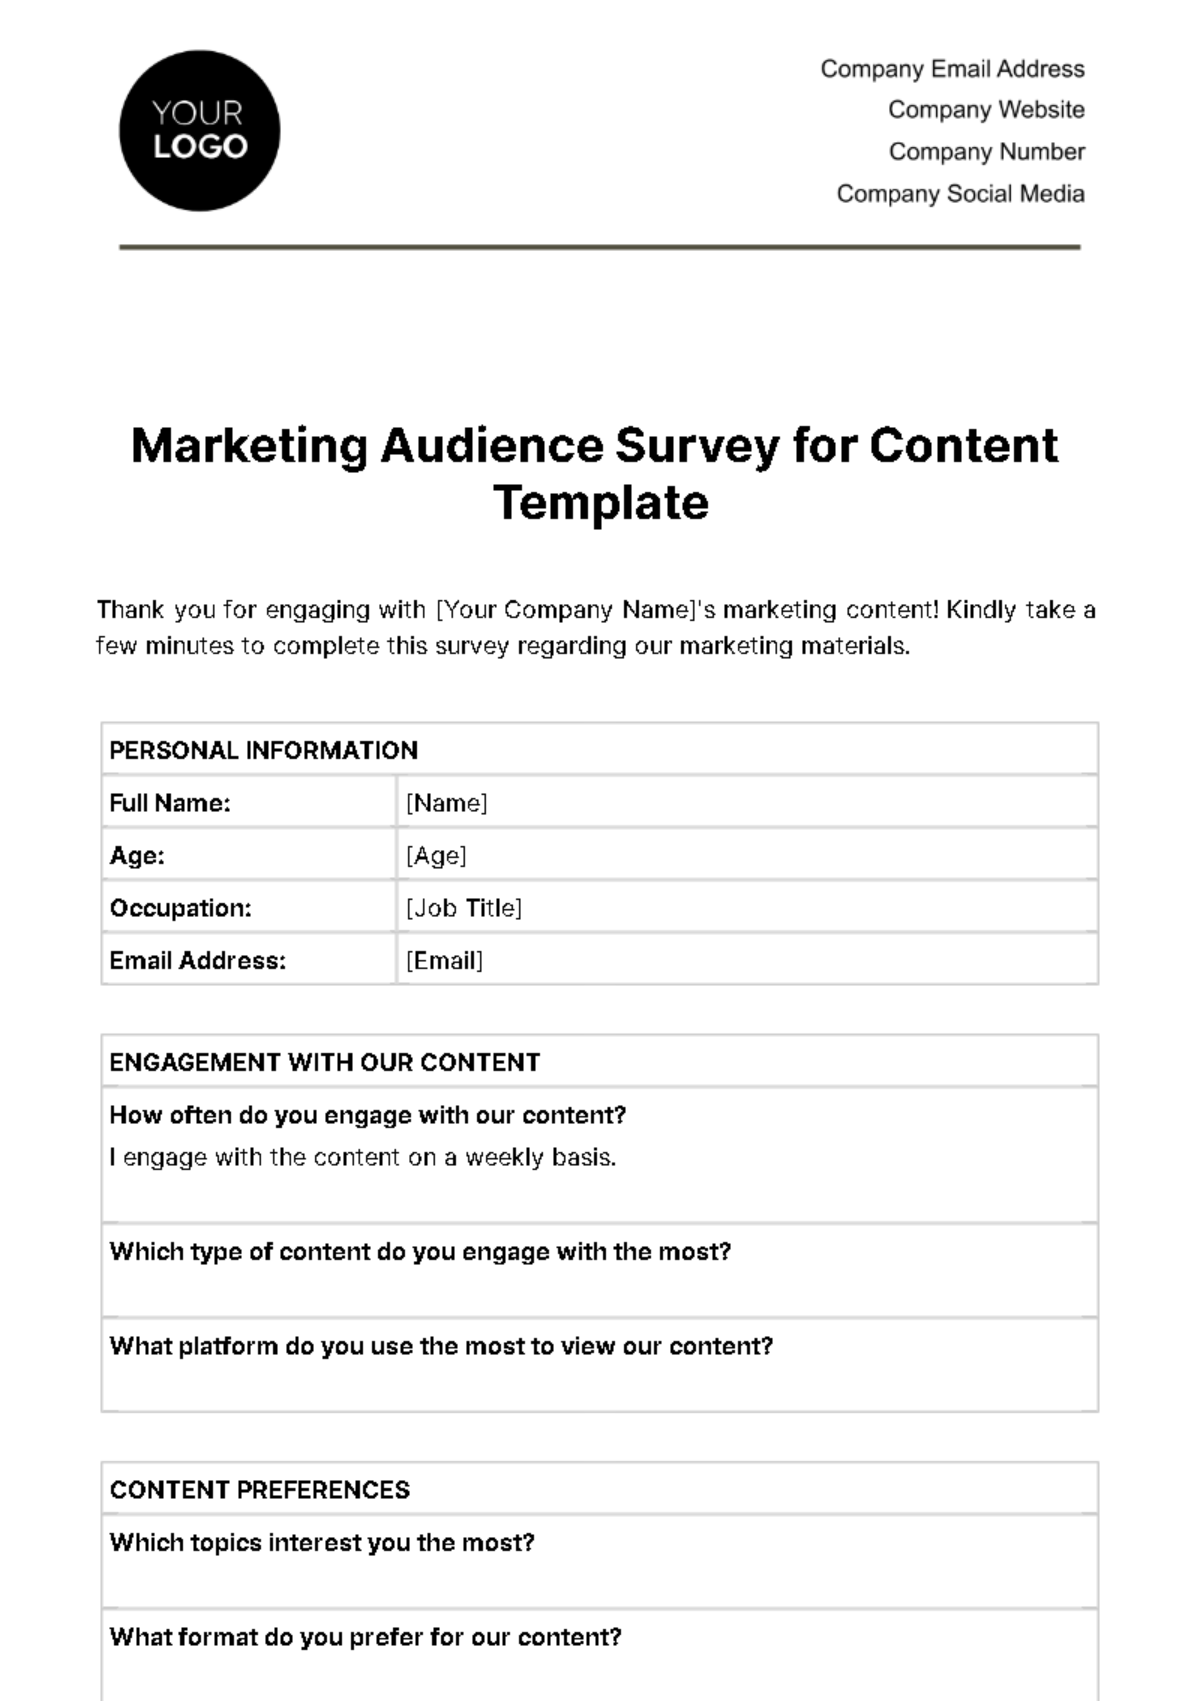 Marketing Audience Survey for Content Template